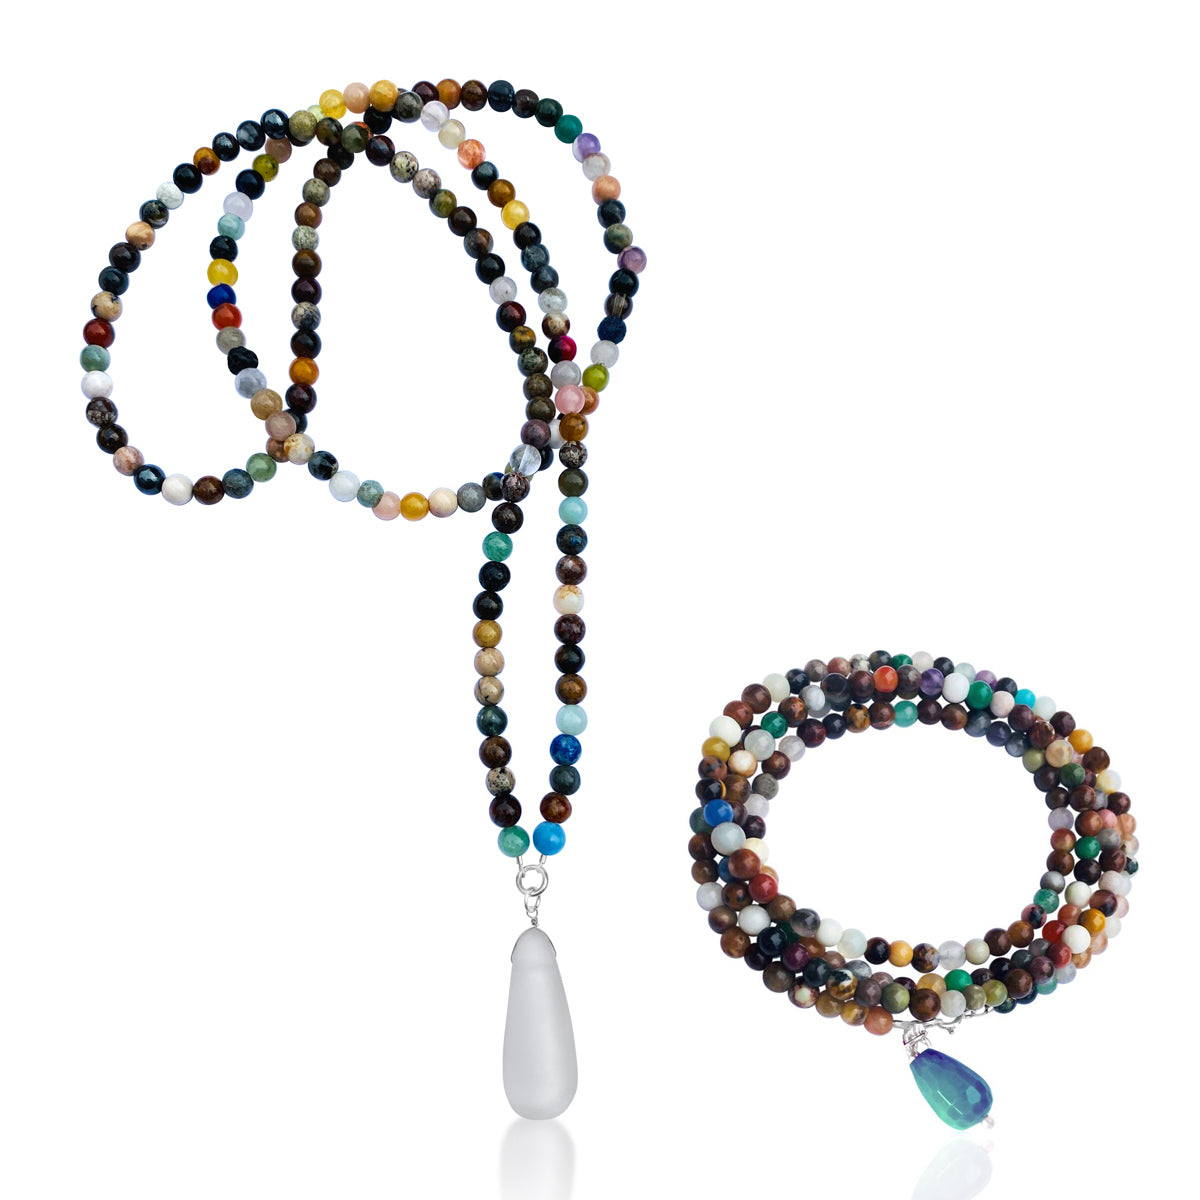 Connect with Mother Earth - Mindfulness Chakra Wrap Bracelet and Necklace Set with Healing Stones